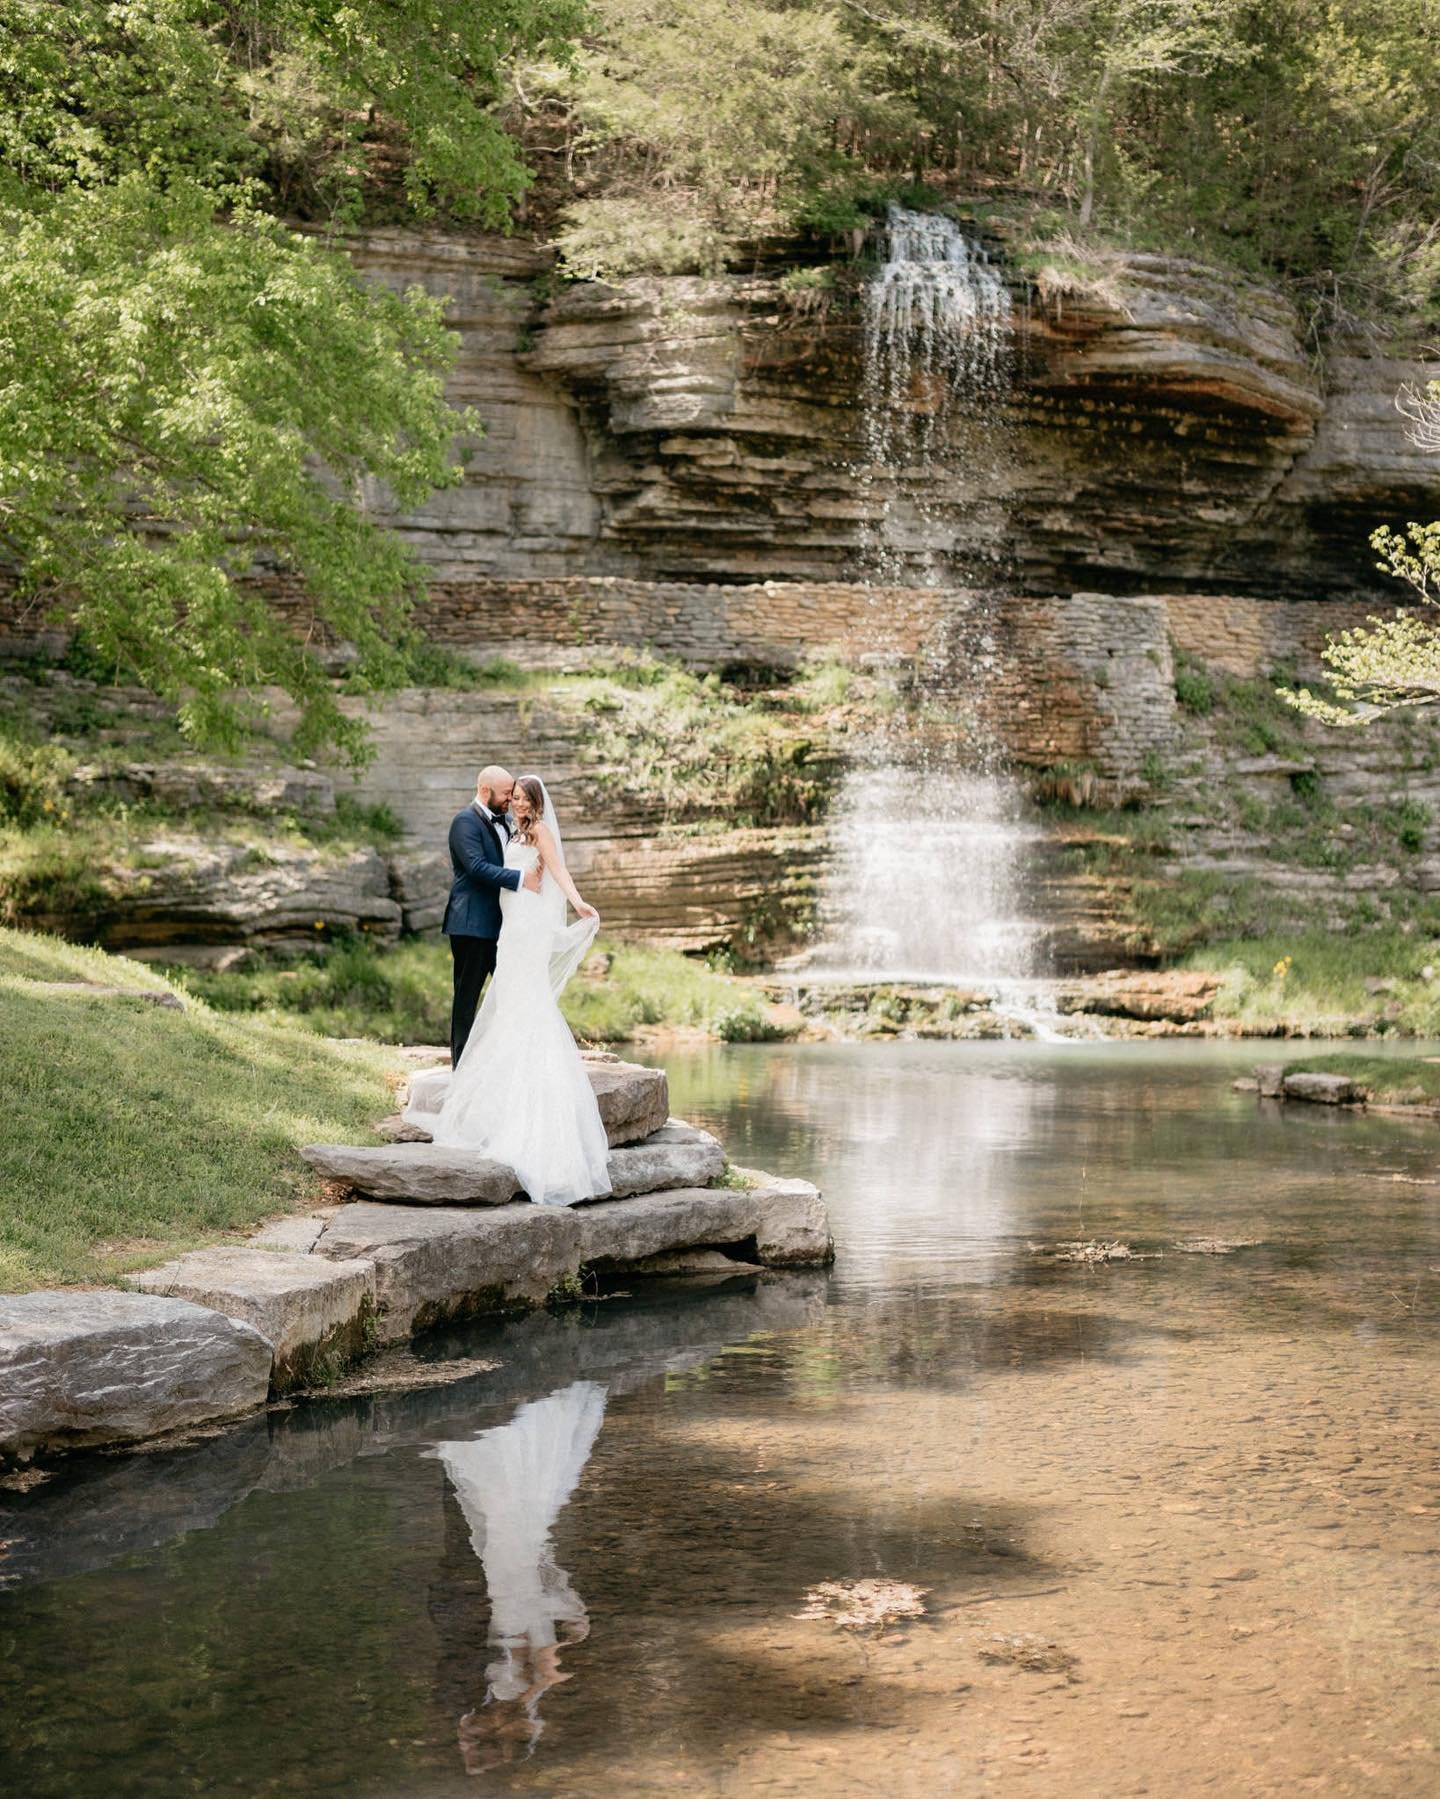 If you love waterfalls and nature, Dogwood Canyon might just be the perfect backdrop for your wedding day!

Venue - @dogwood_canyon 
Planning - @socialgraces417 
Makeup - @airbrush.andie 
Hair - @diamondsanddos 
Video - @acelegendary 
DJ - @elevatedj